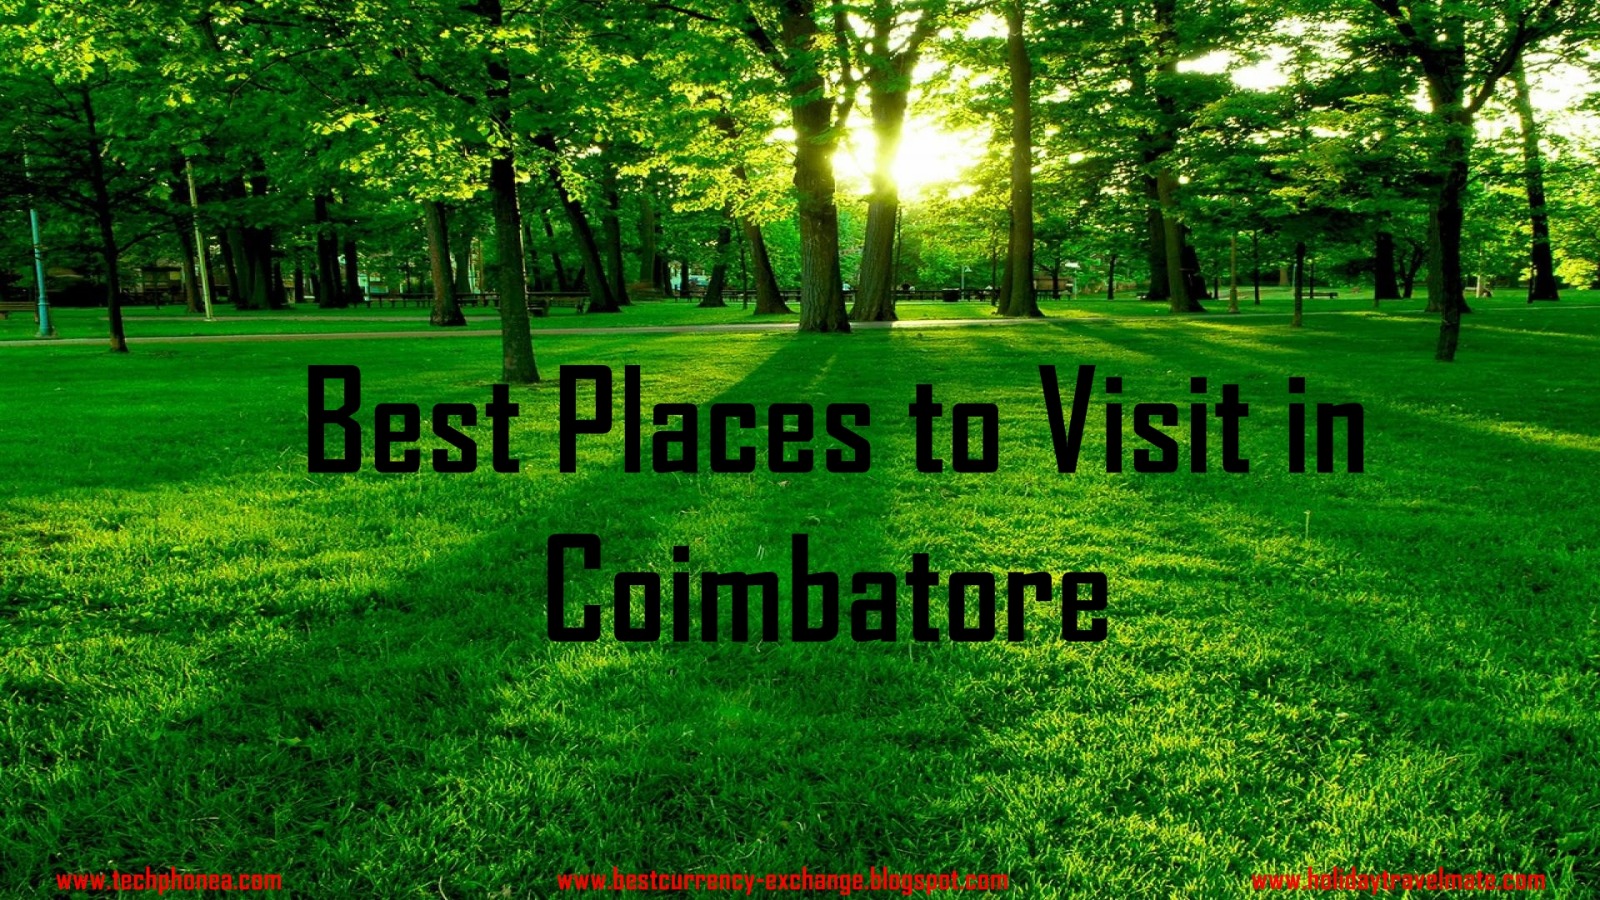 Best Places to Visit in Coimbatore - Domestic Travel Blog